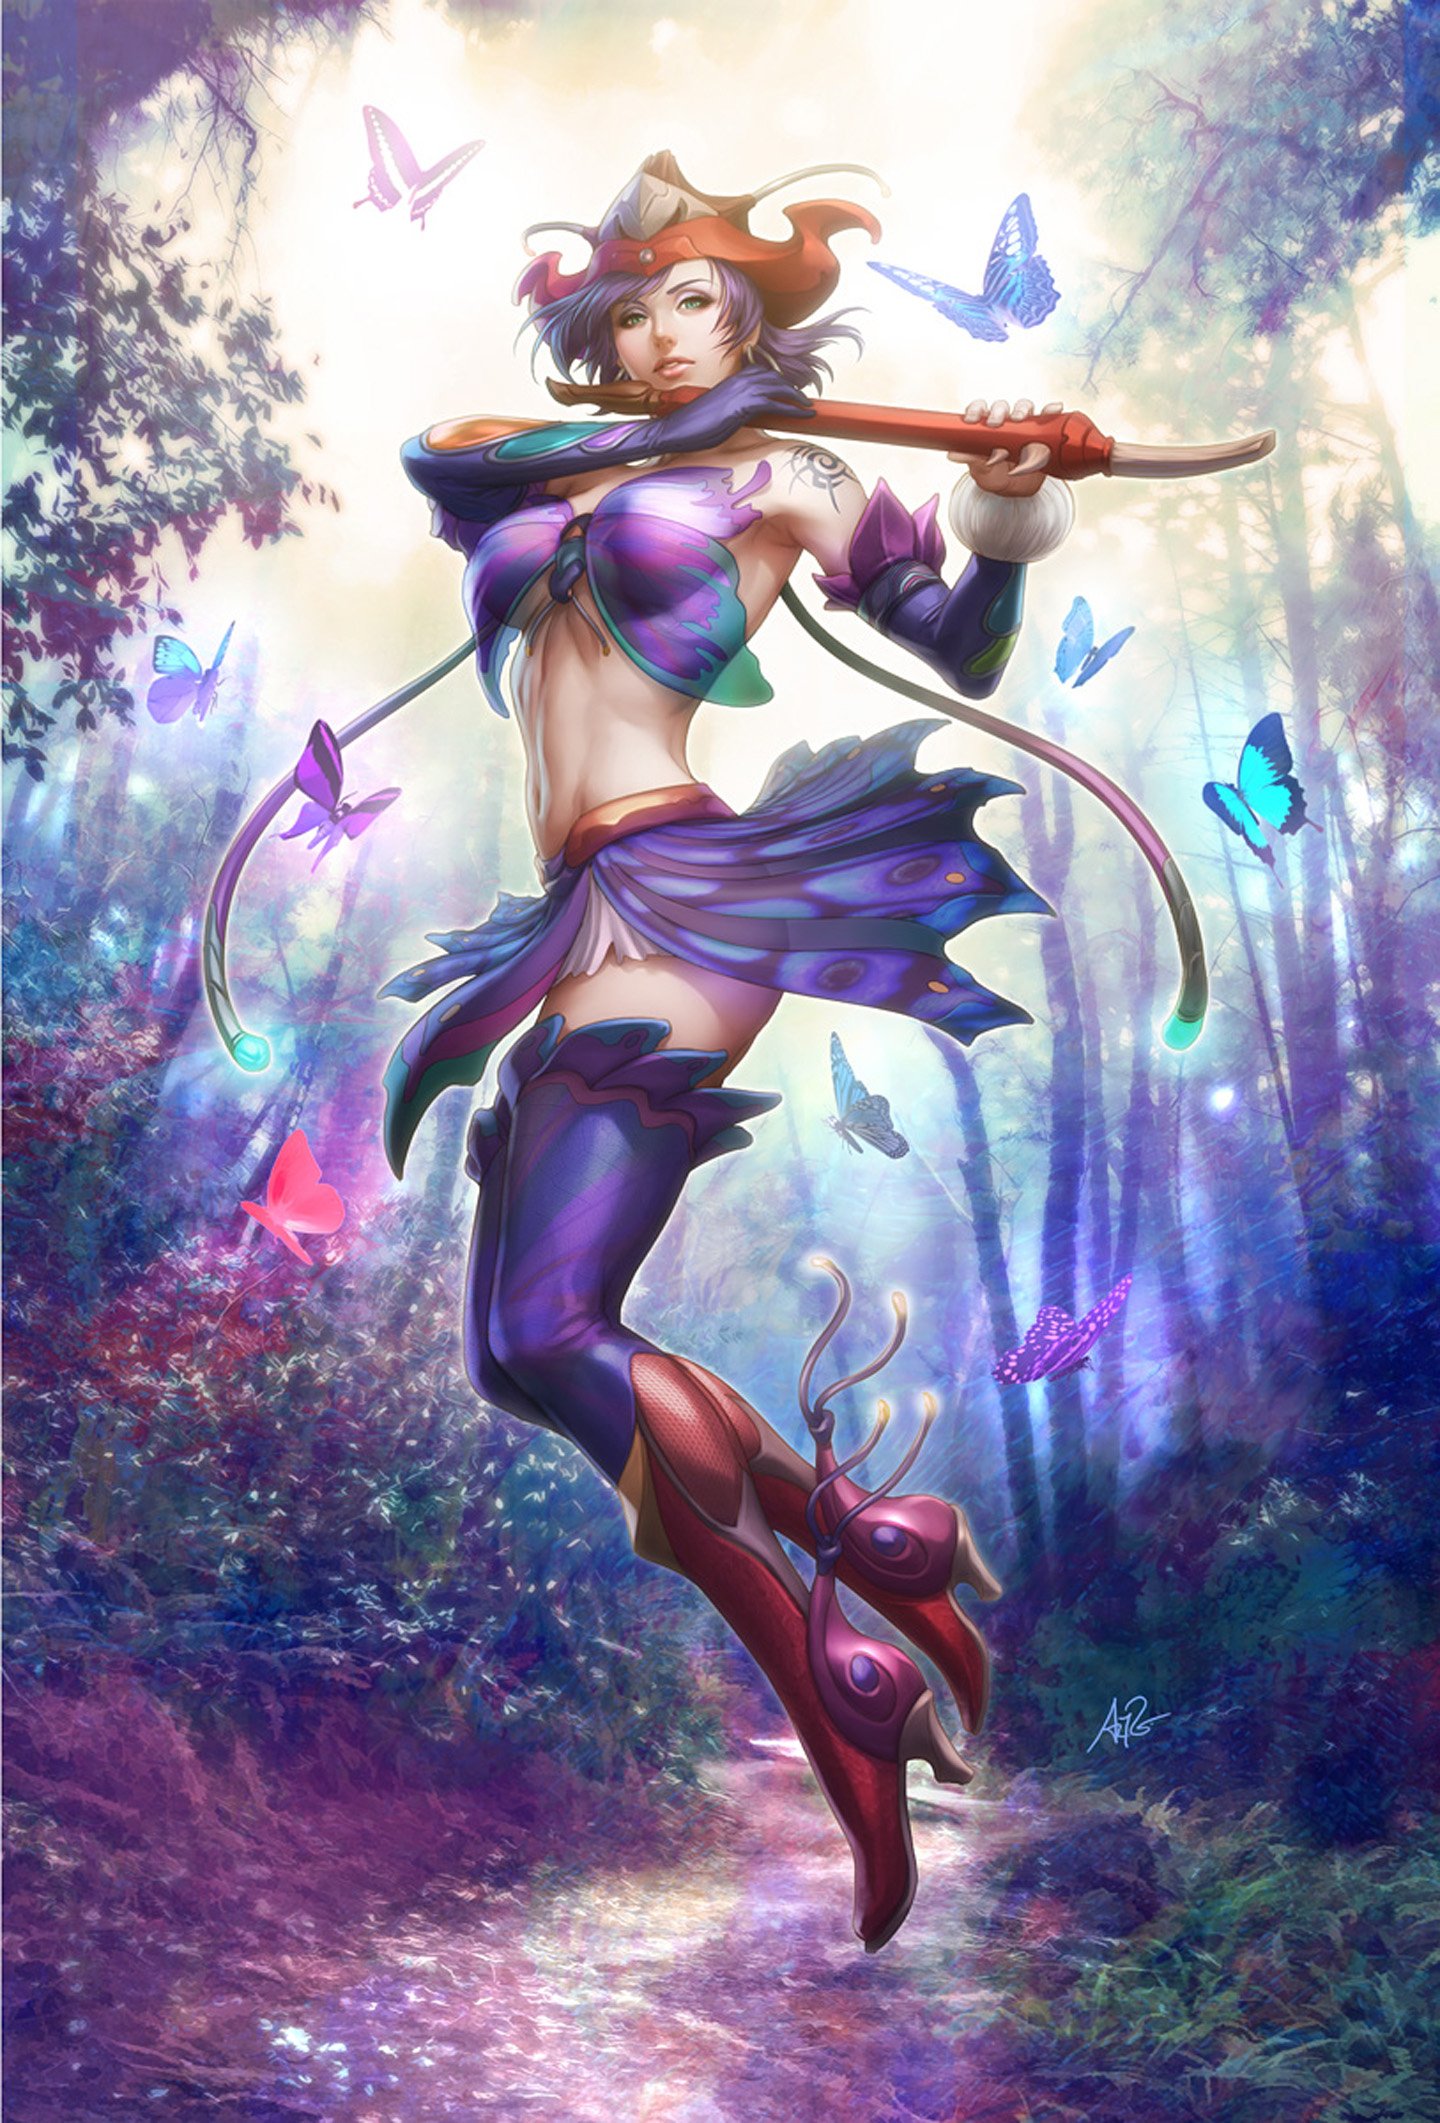 game, Butterfly, Fantasy, Girl, Forest, Magic Wallpaper